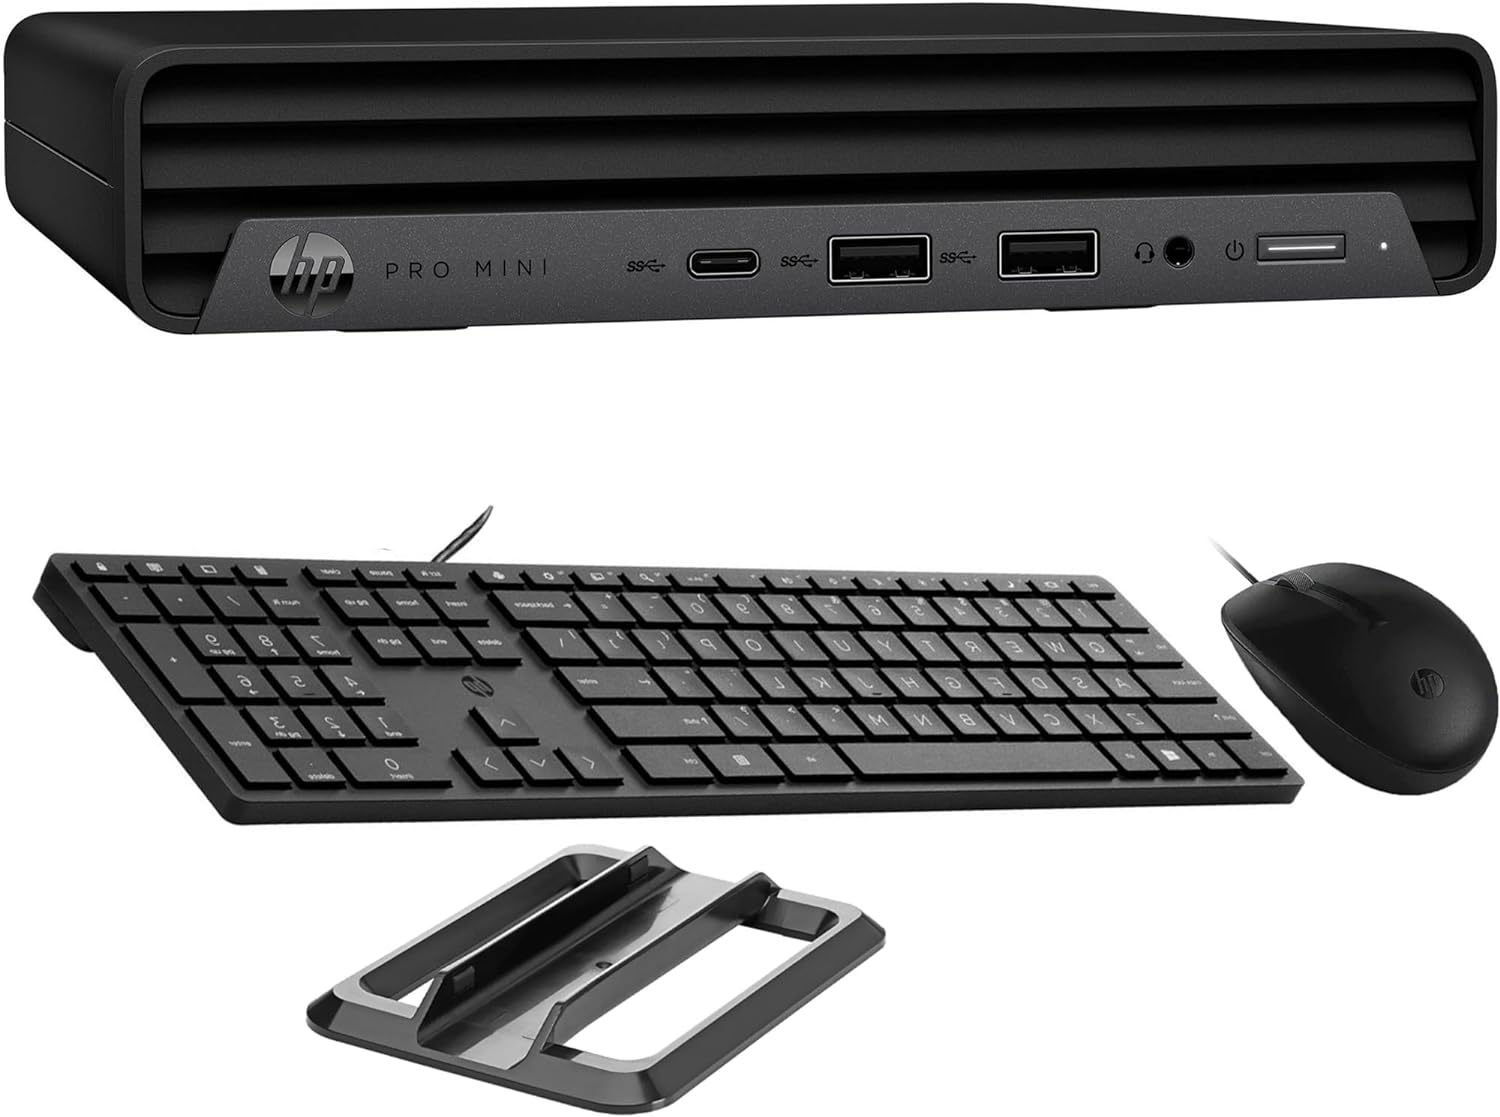 HP ProDesk 400 G9 Mini Business Desktop Computer, 12th Intel 12-Cores i7-12700T up to 4.7GHz, 16GB DDR4 RAM, 512GB PCIe SSD, WiFi 6, Bluetooth 5.2, Type-C, Keyboard and Mouse, Windows 11 Pro, AZ-XUT